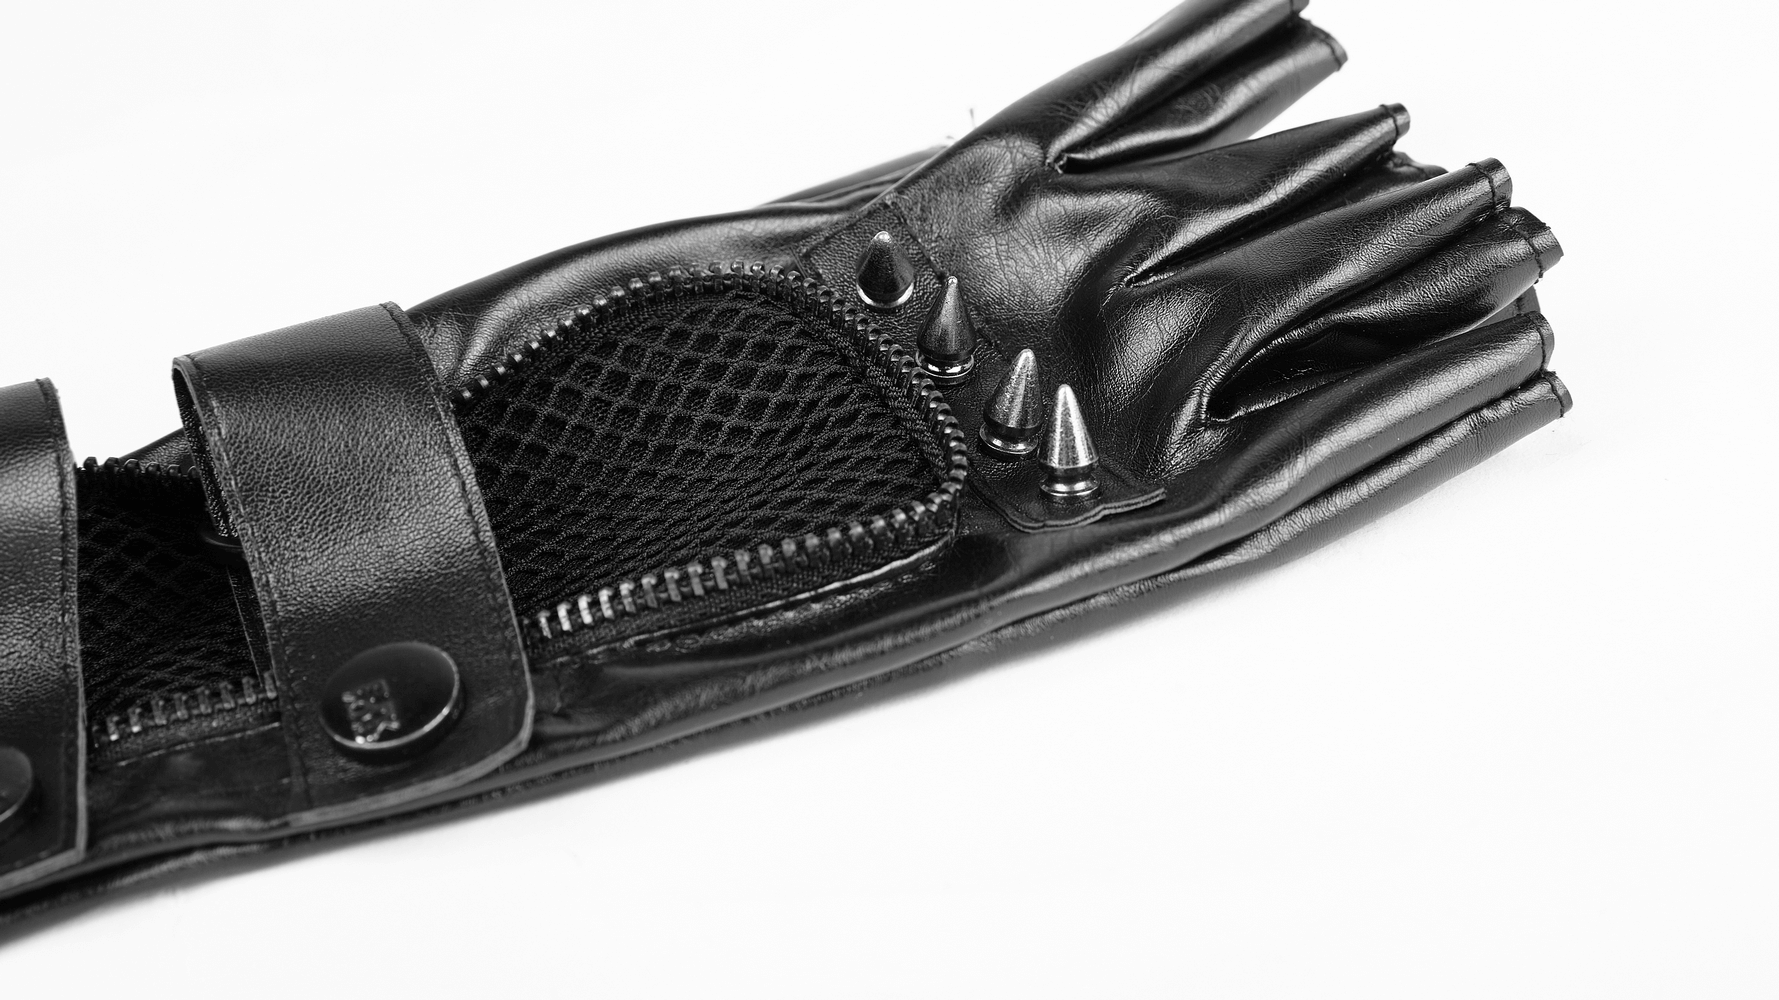 Black Punk Gauntlet Gloves with Spiked Joints and Mesh Accents